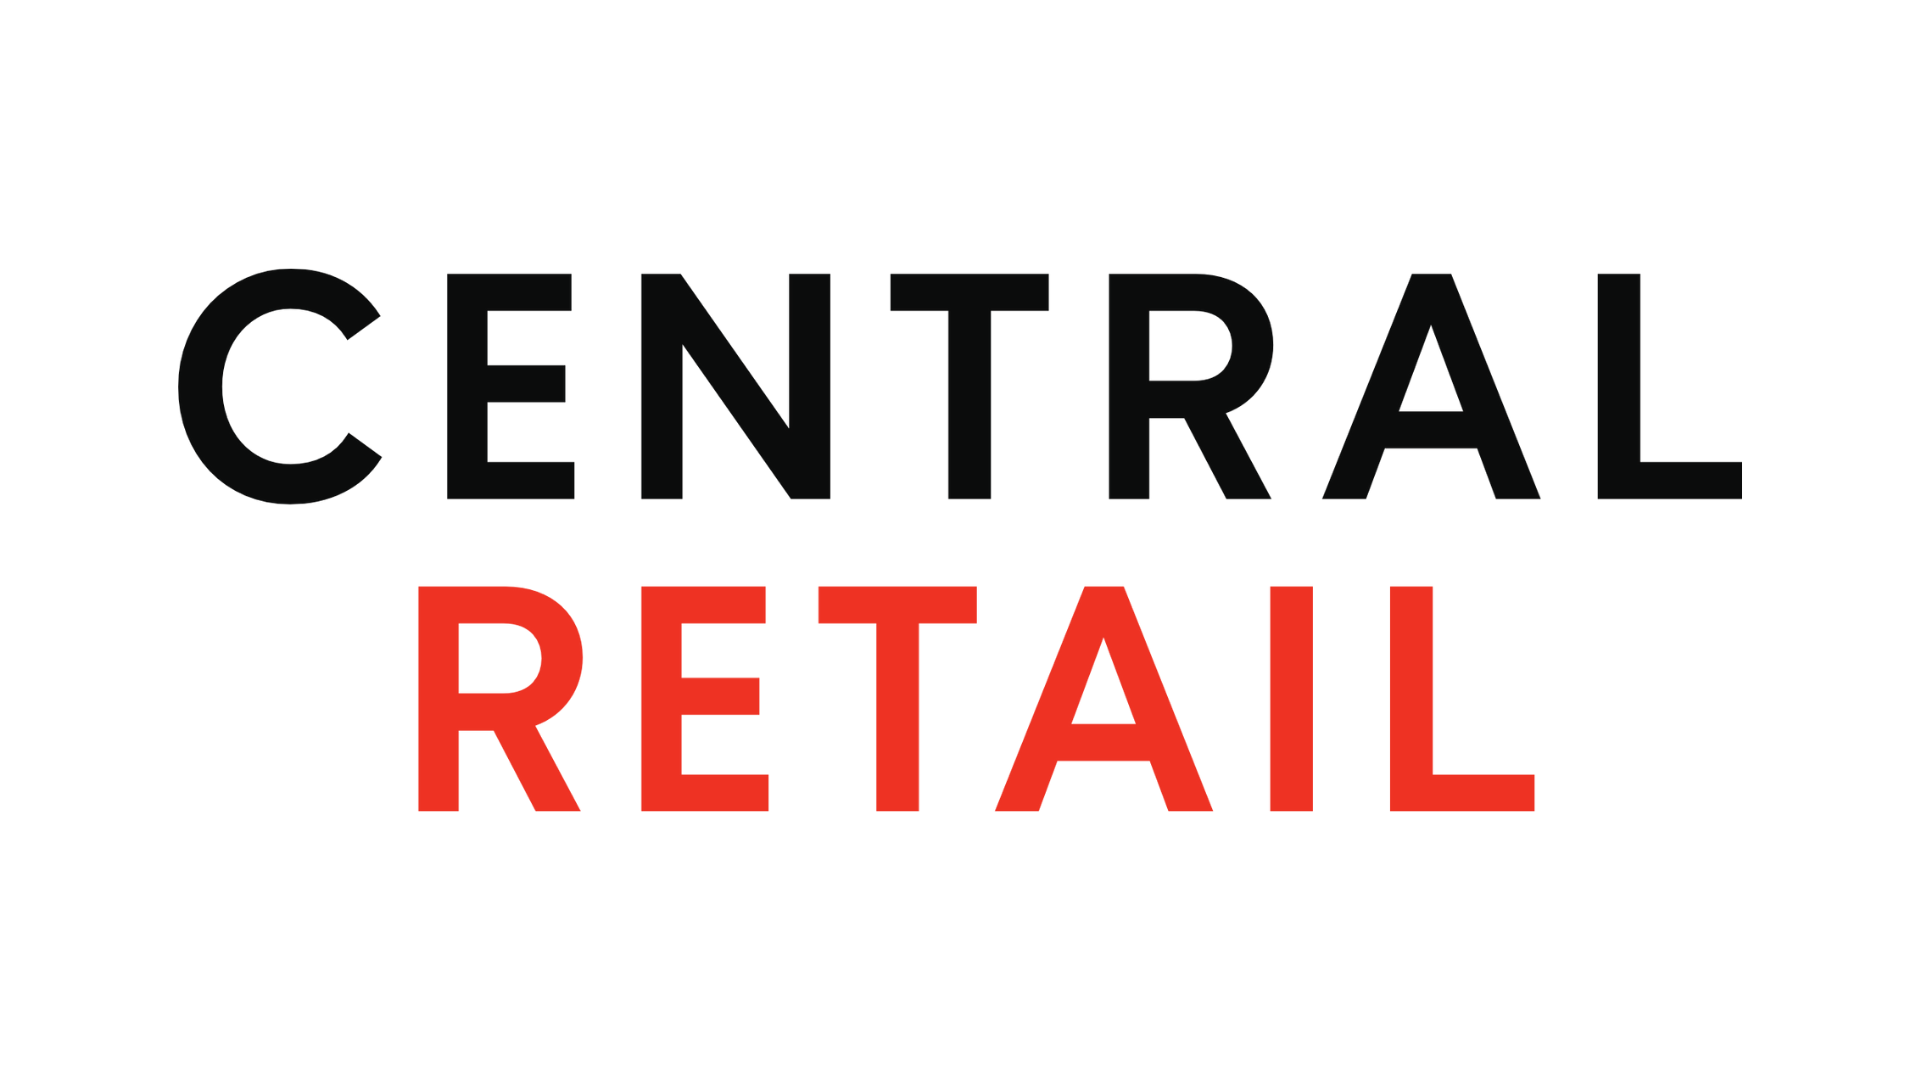 CENTRAL RETAIL